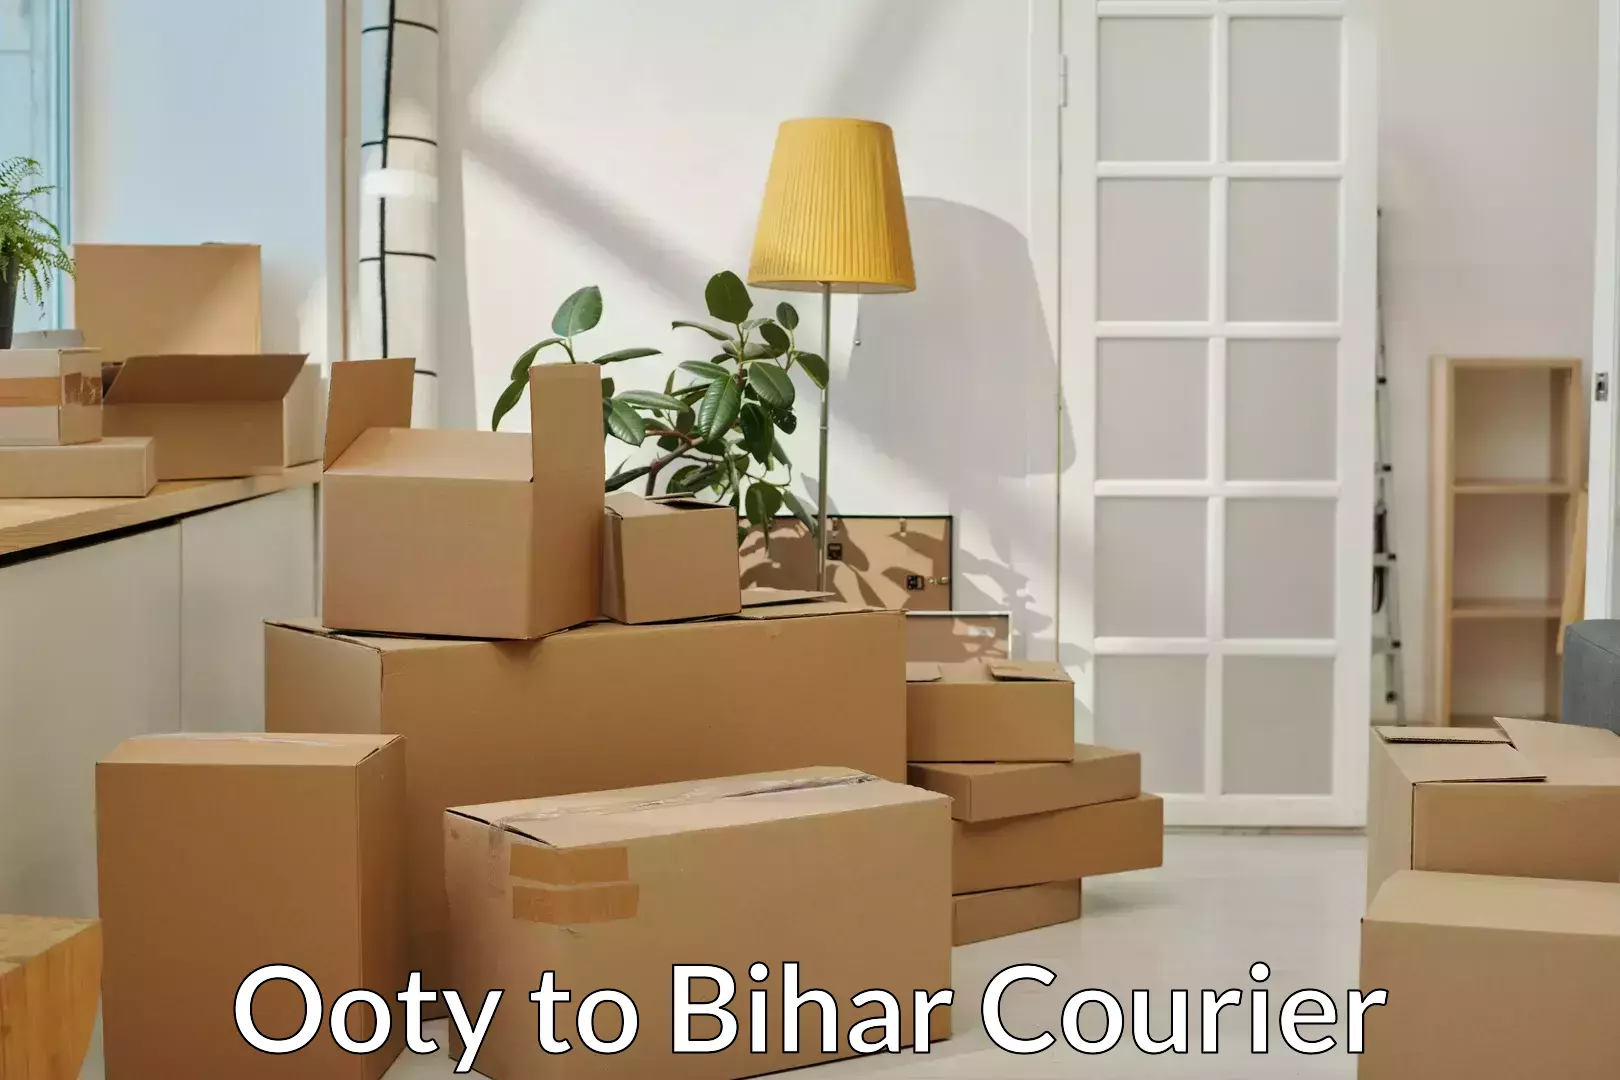 Furniture delivery service Ooty to Sangrampur